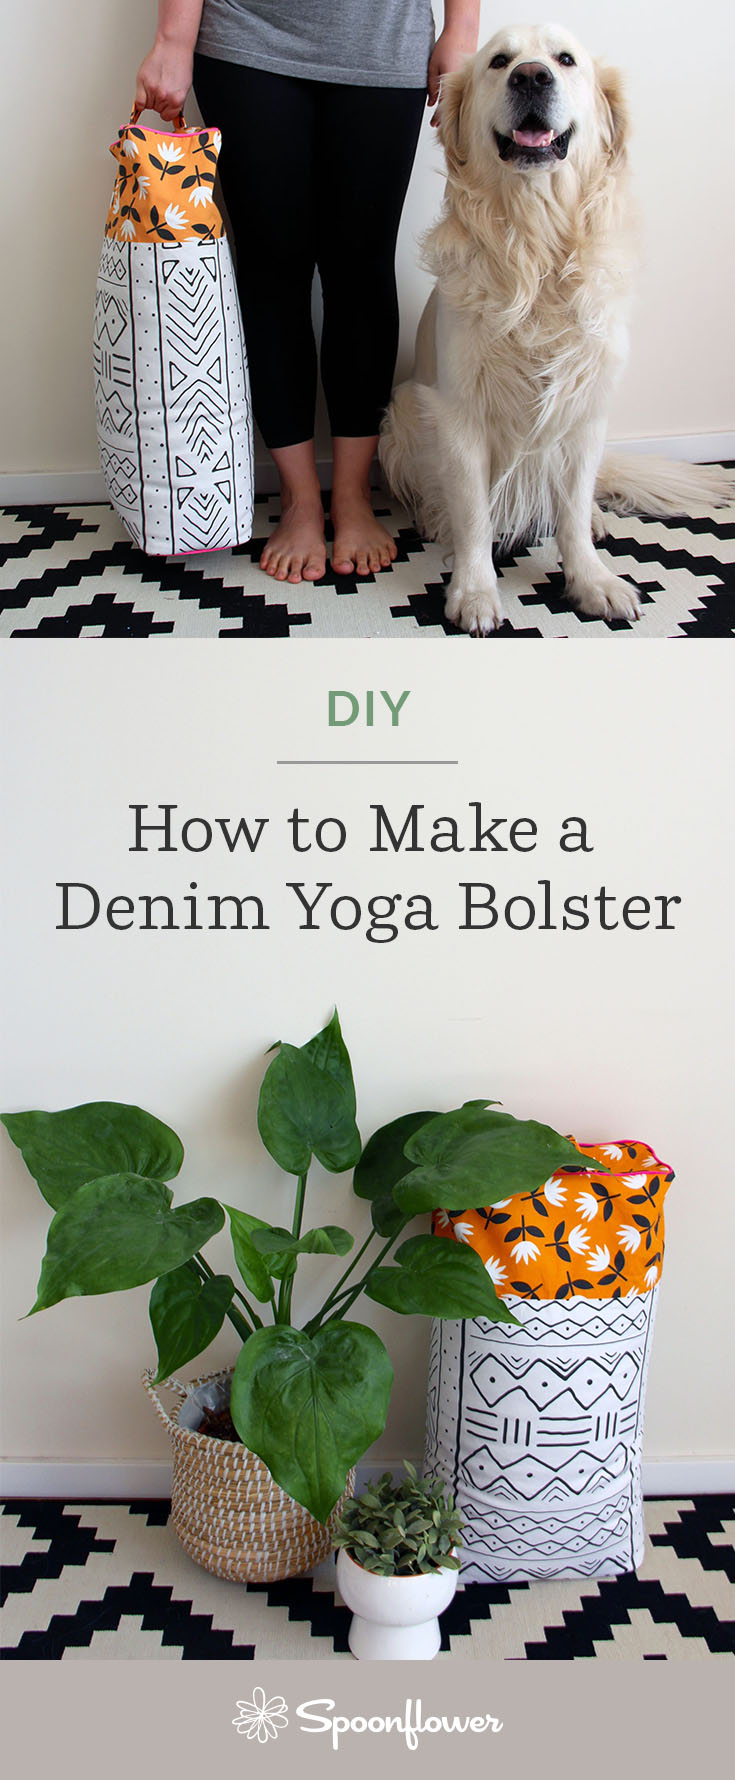 How to Create a Colorful DIY Yoga Bolster | Spoonflower Blog 